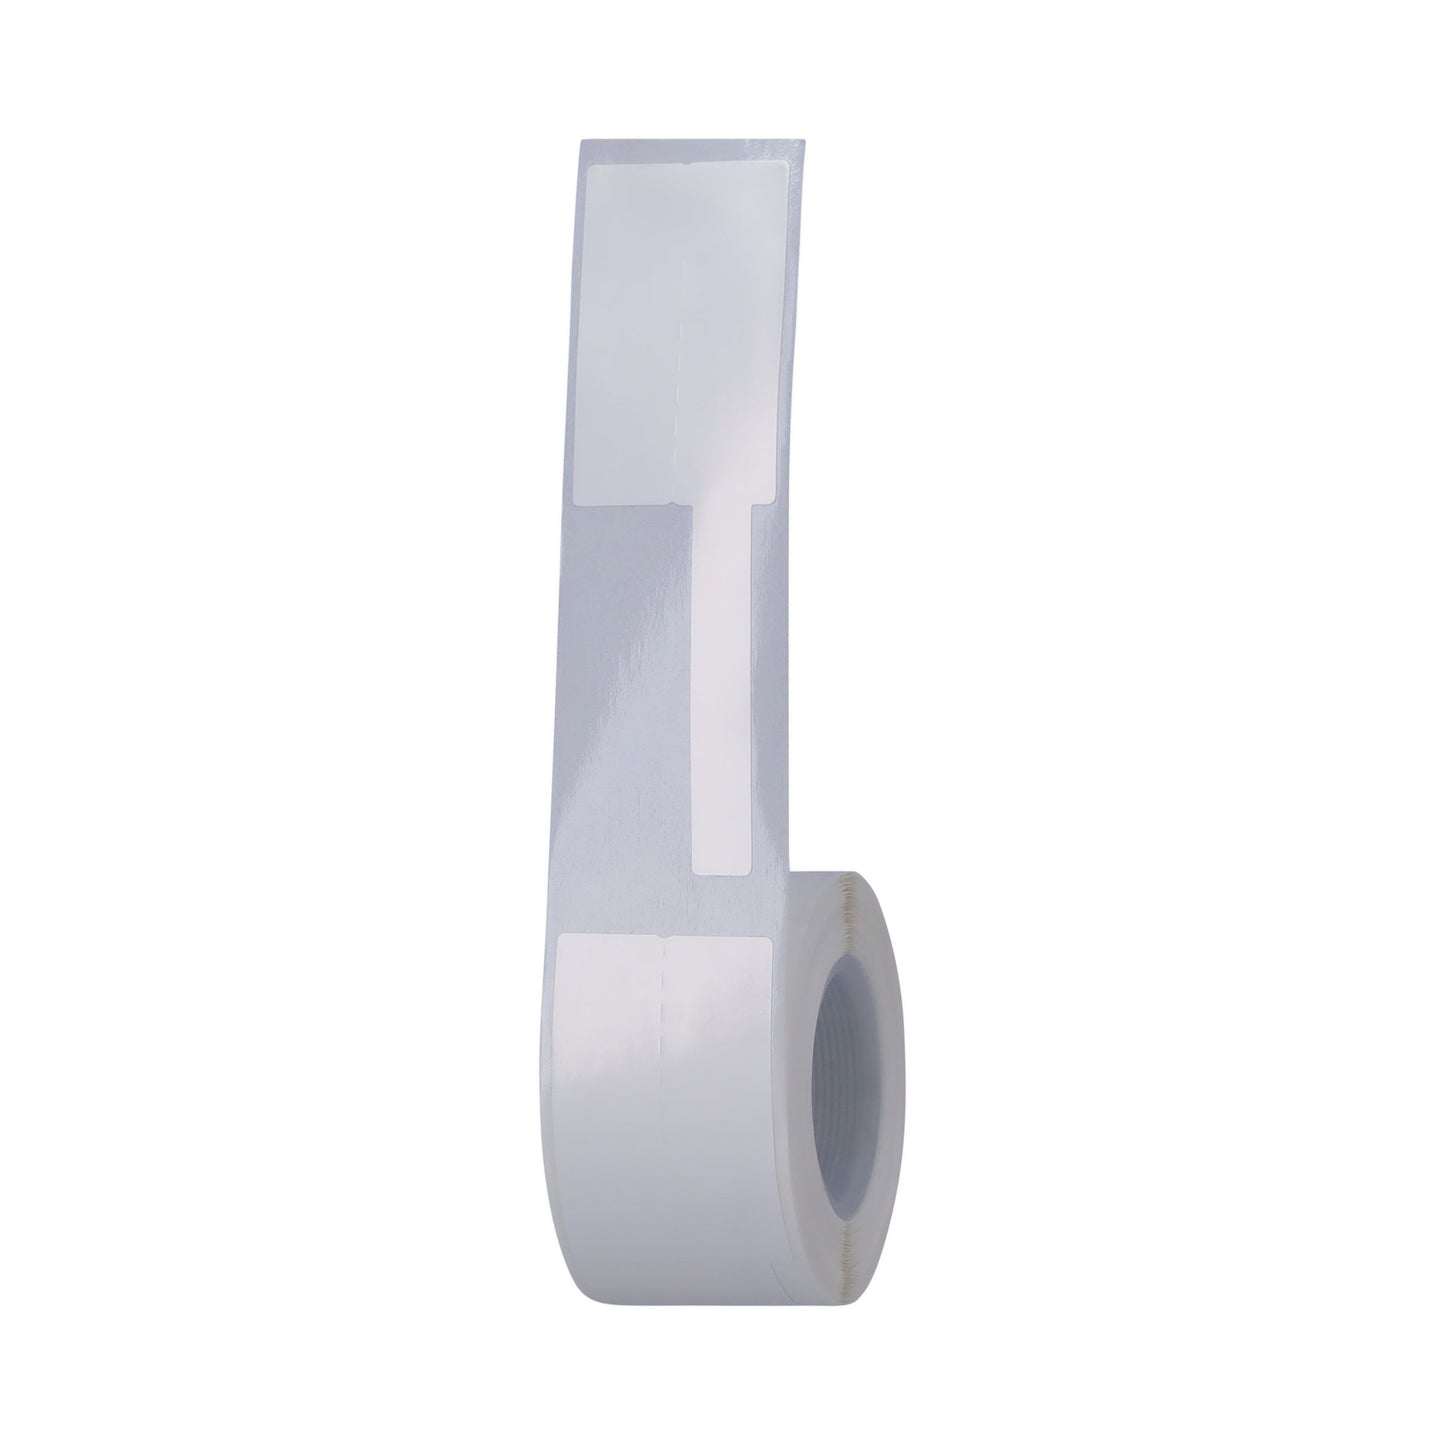 NIIMBOT - D101 ONLY - R25*78 - 100 LABELS PER ROLL - CABLE - WHITE